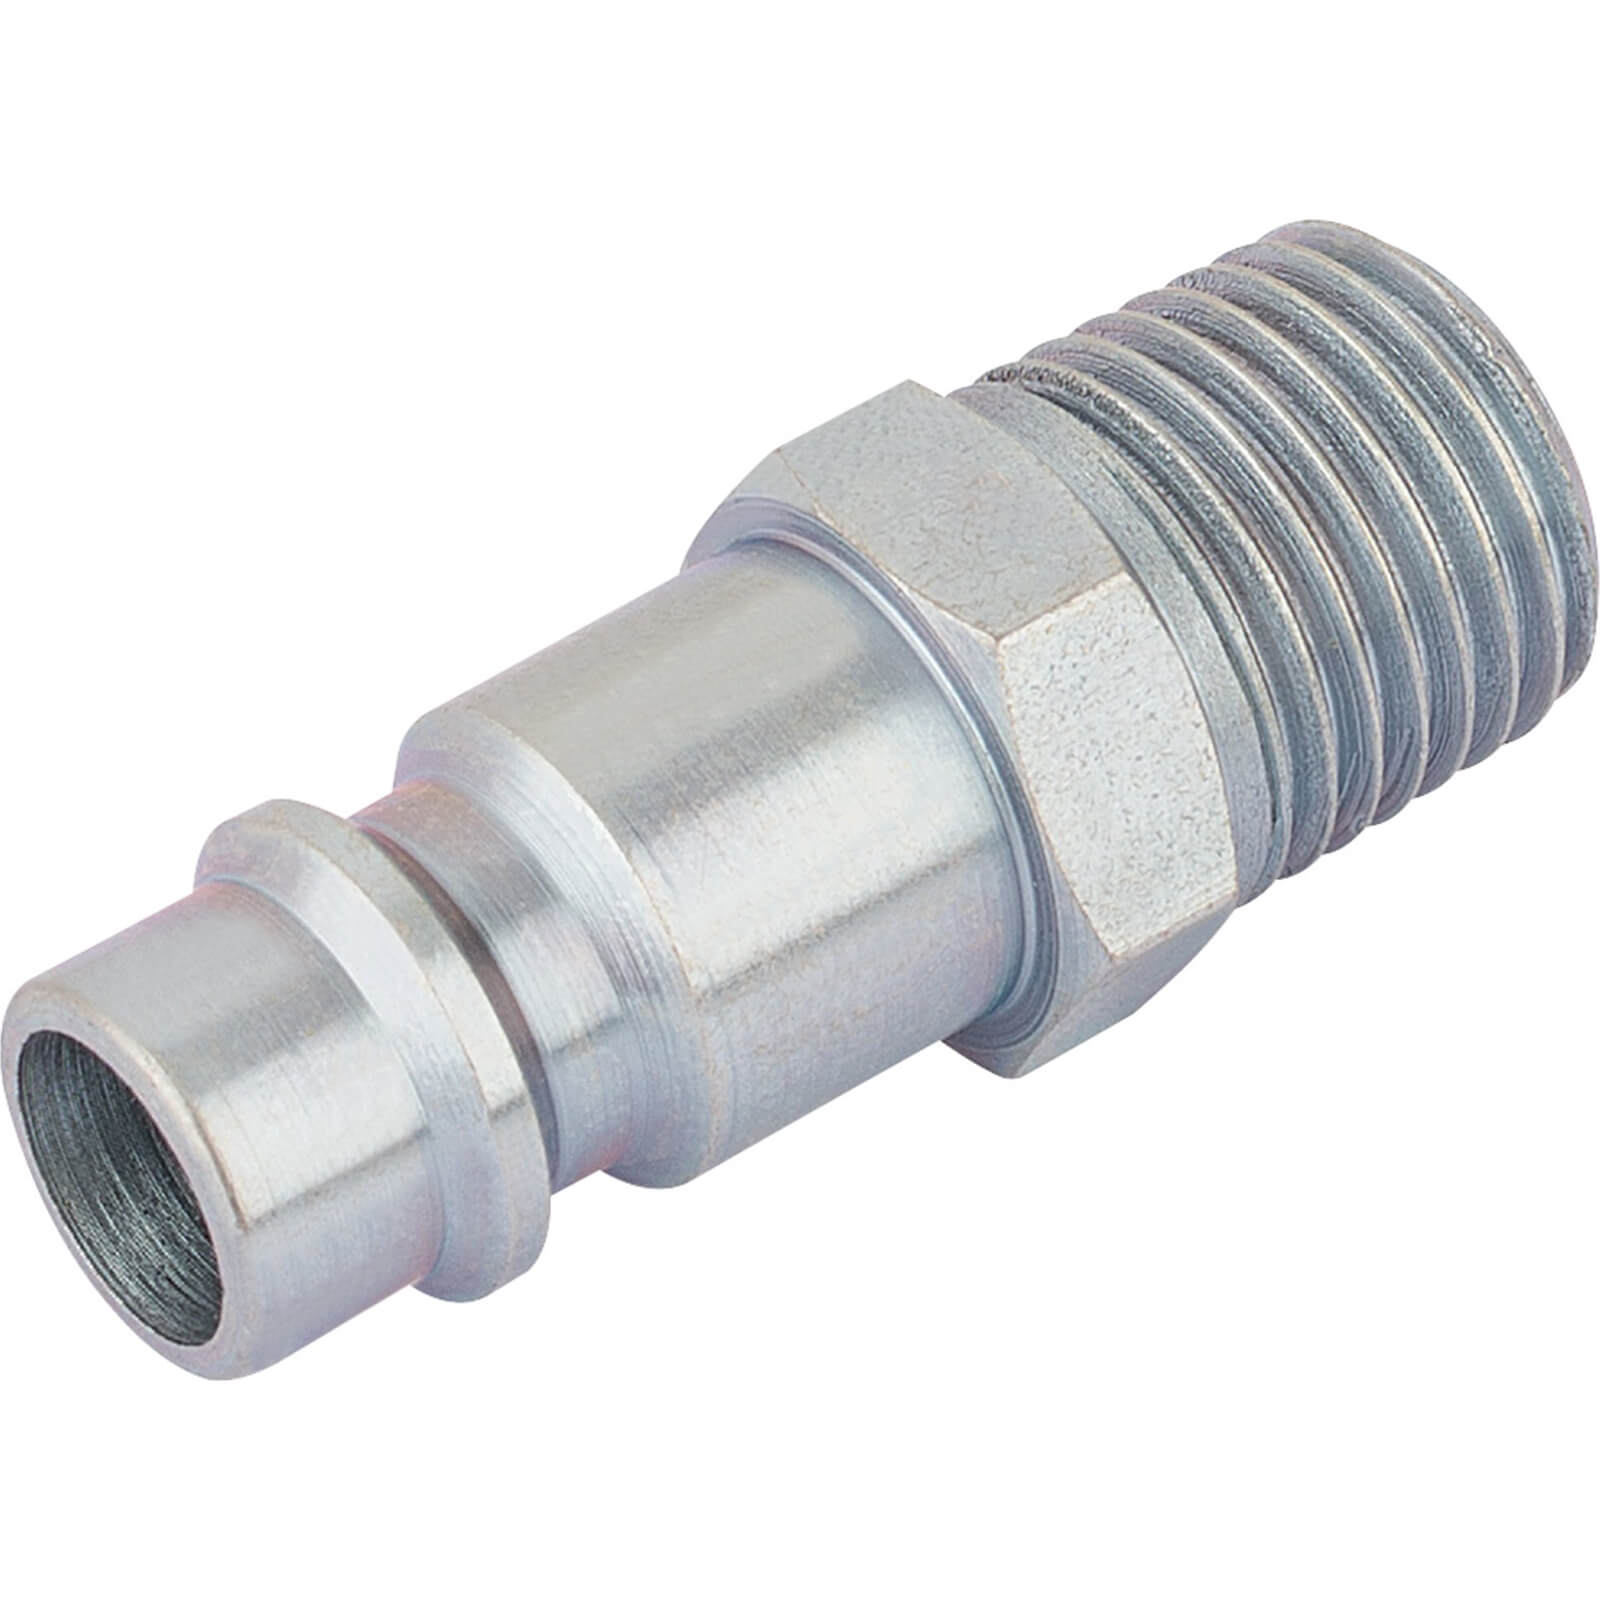 Image of Draper PCL Euro Male Nut Air Line Coupling Adaptor BSP Male Thread 1/4" BSP